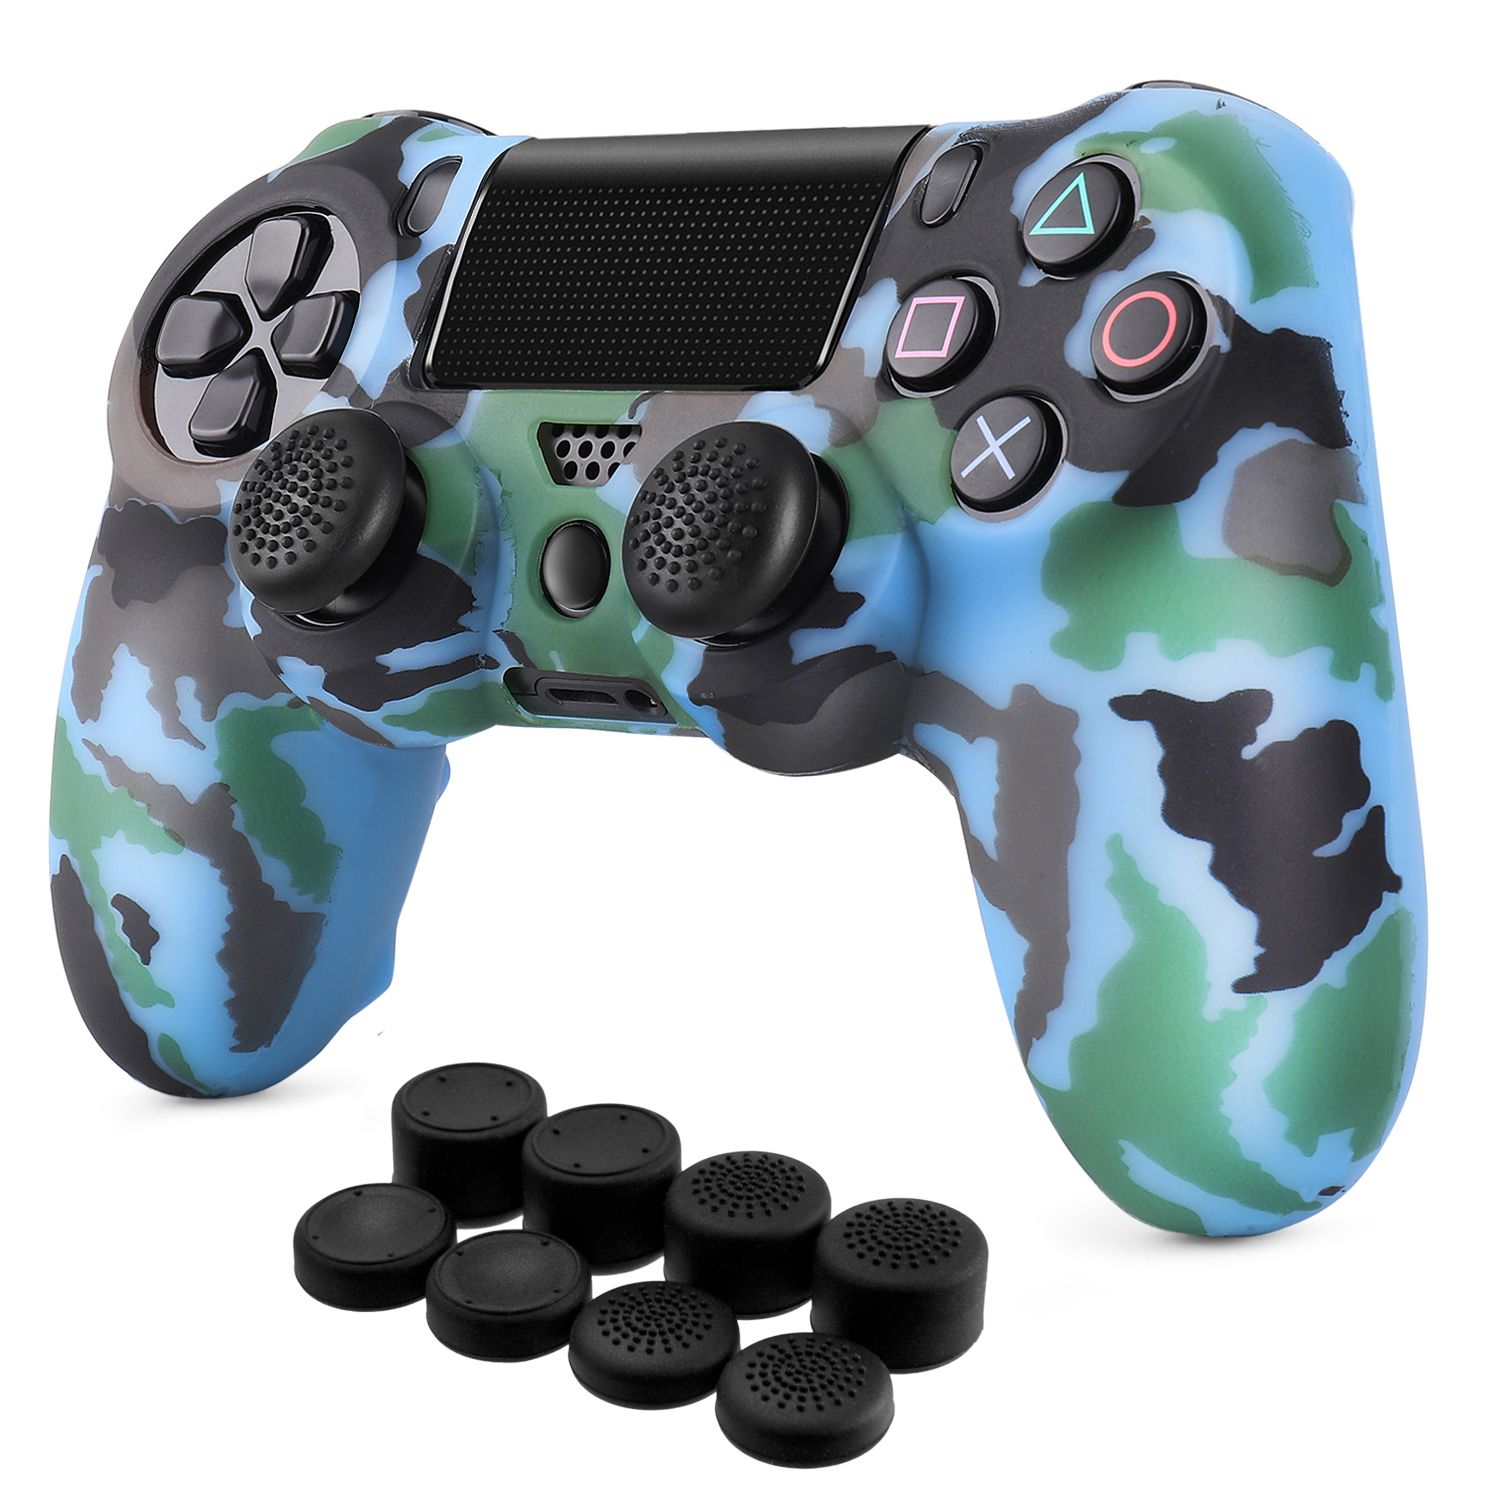 rubber ps4 controller skin